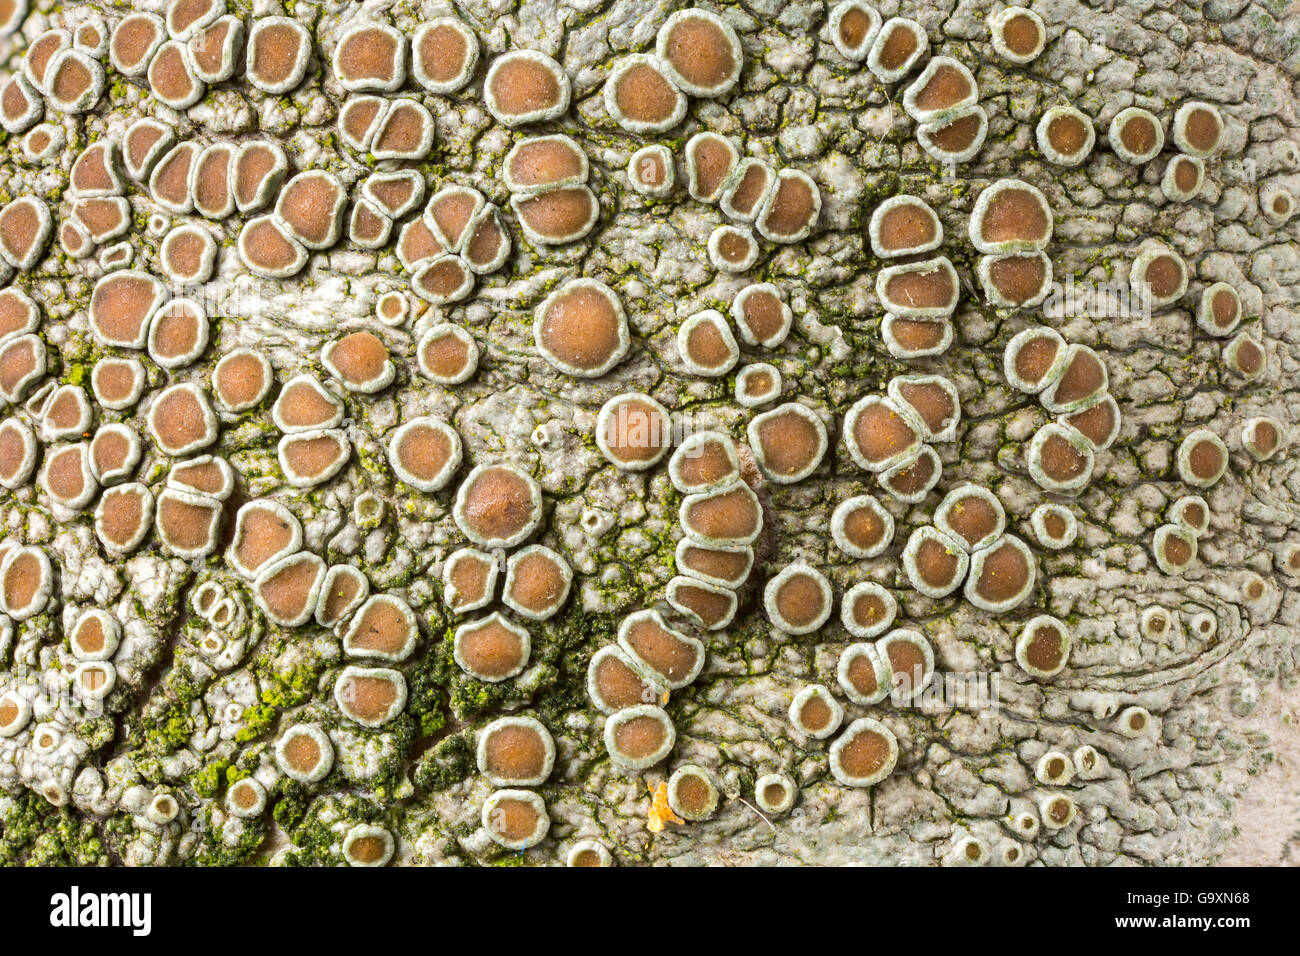 Lichen (Lecanora sp probably L. chlarotera) growing on a birch twig.  Focus-stacked image, X3 magnification. Stock Photo